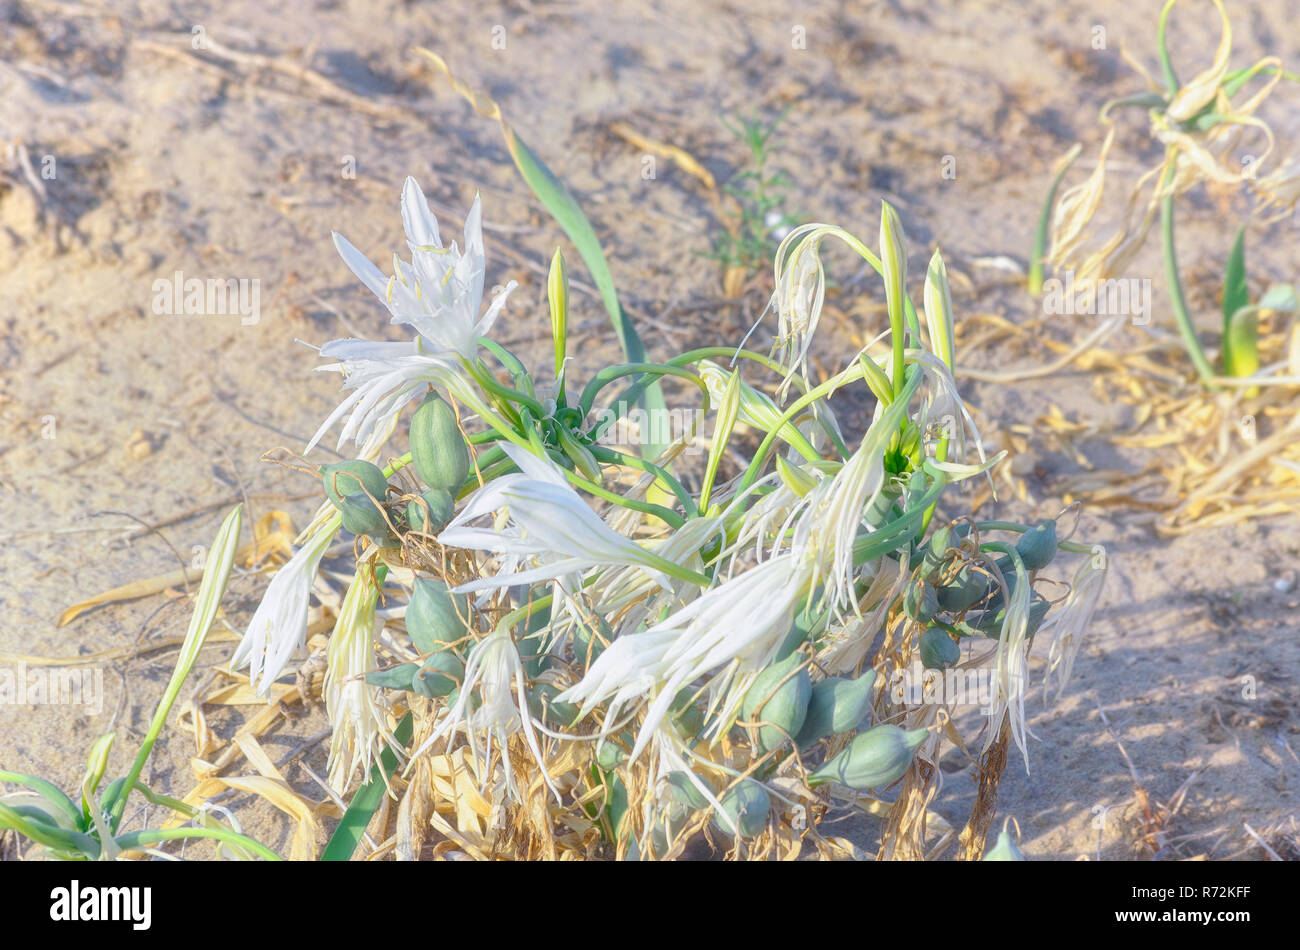 Pancratium maritimum or sea daffodil. Beautiful specie of bulbous plant with white leaves, native to the Mediterranean regions, that grows on beaches  Stock Photo